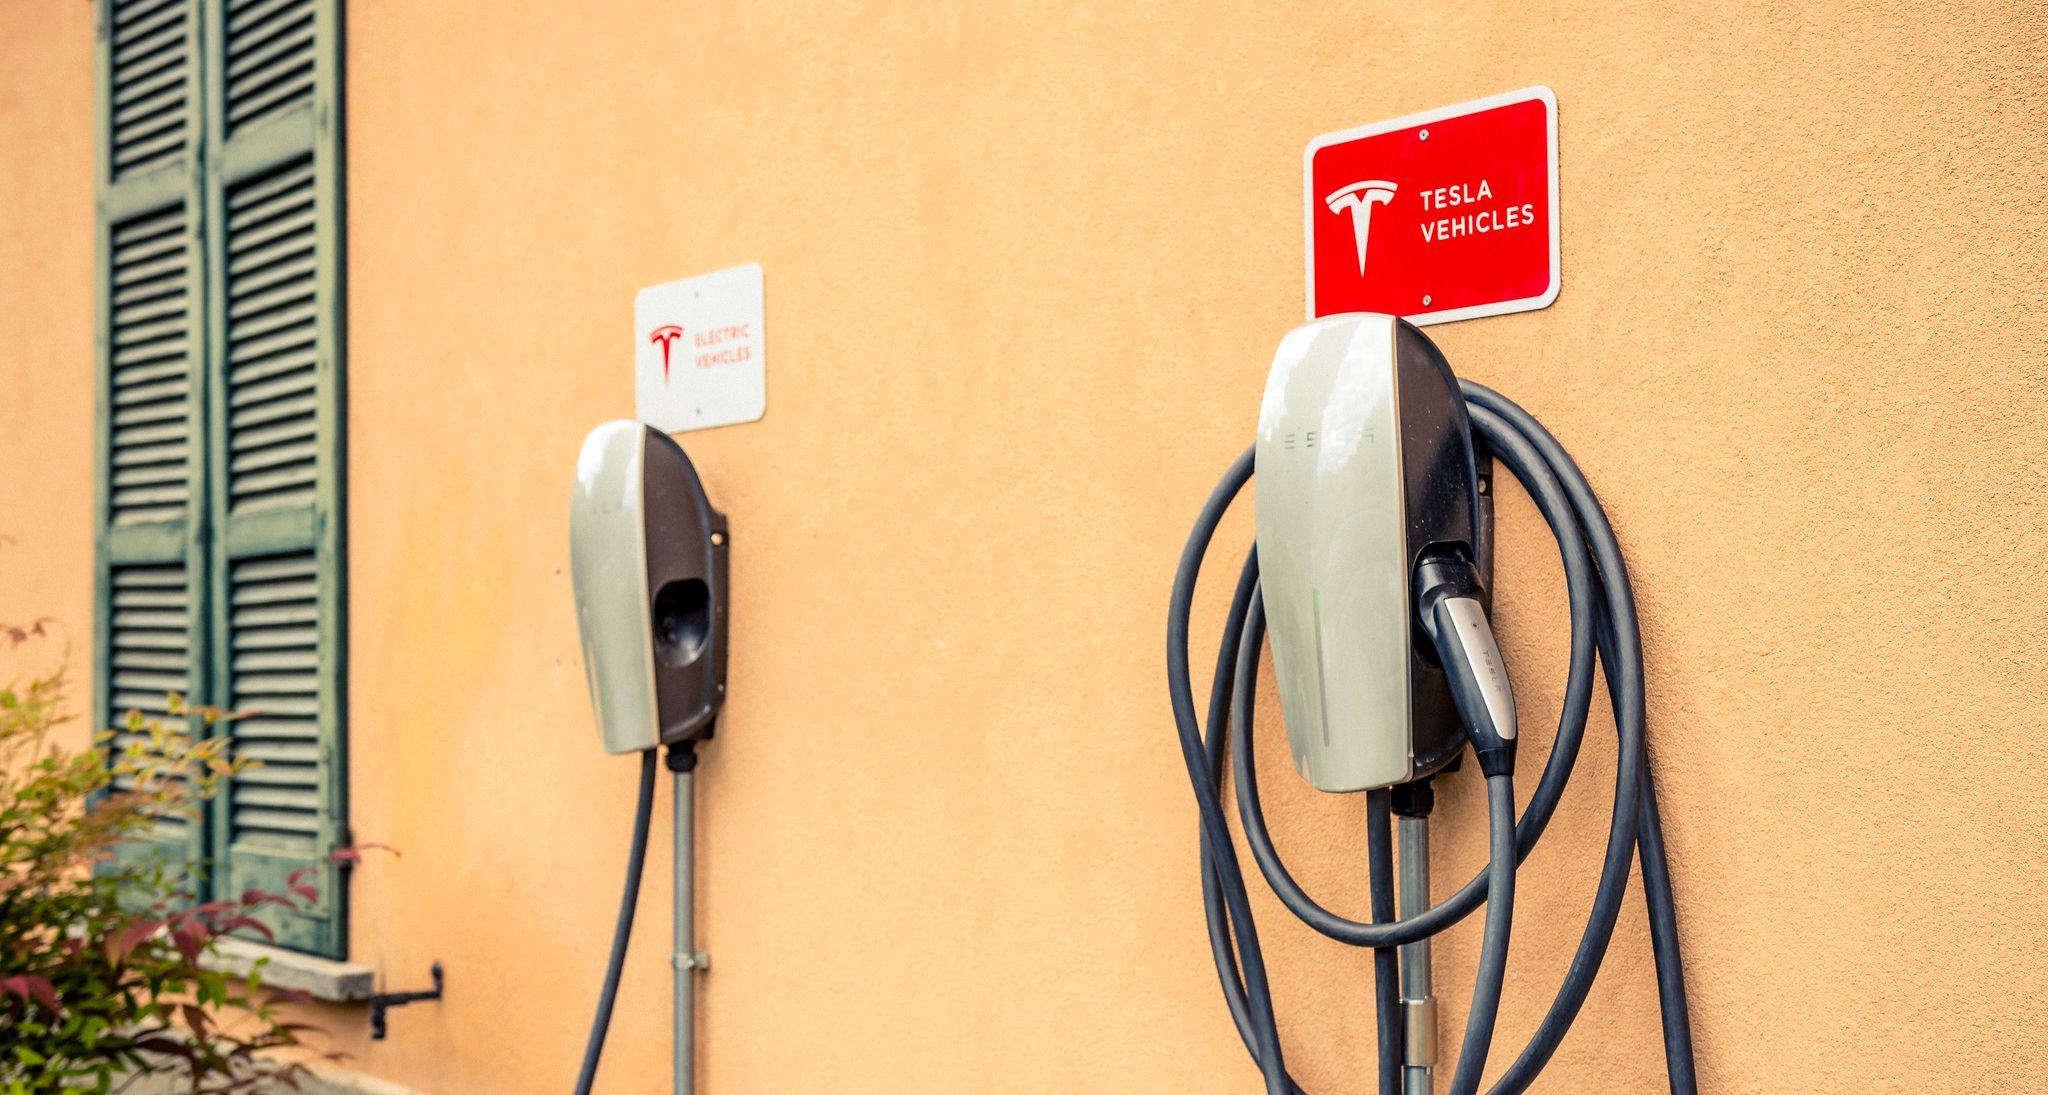 picture of wall mounted tesla destination chargers